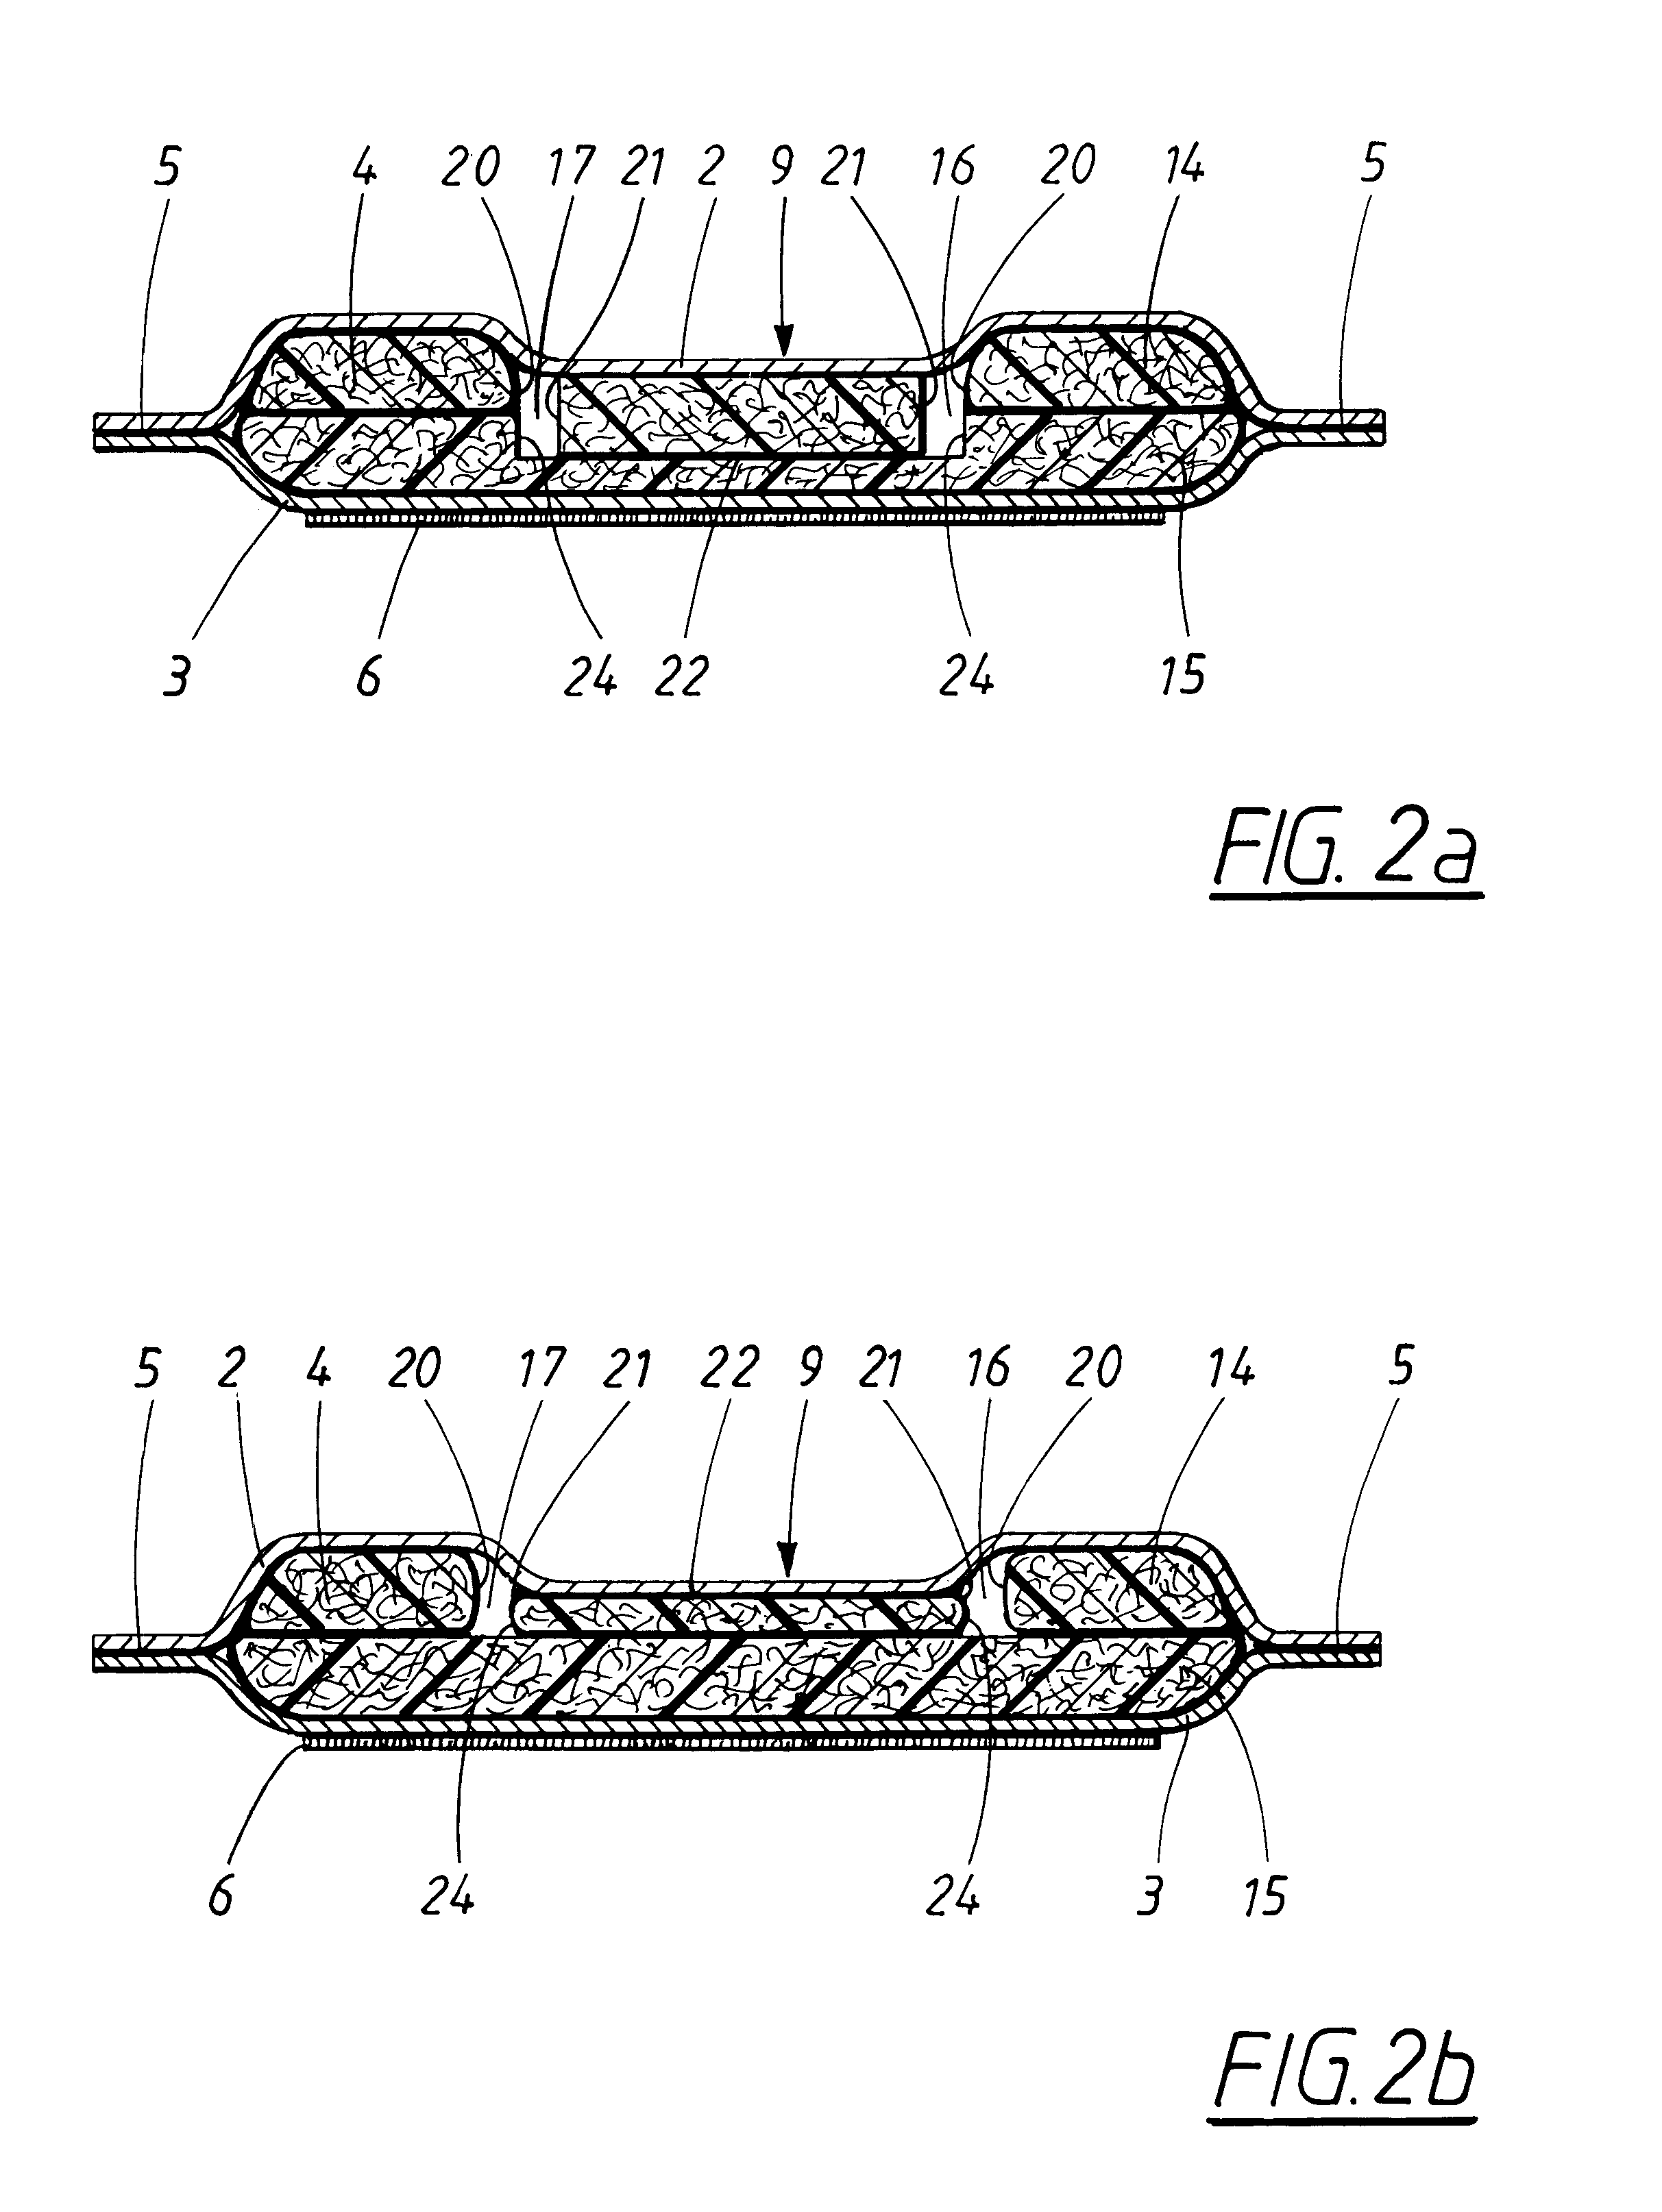 Absorbent product with improved instantaneous liquid adsorption, and improved fit